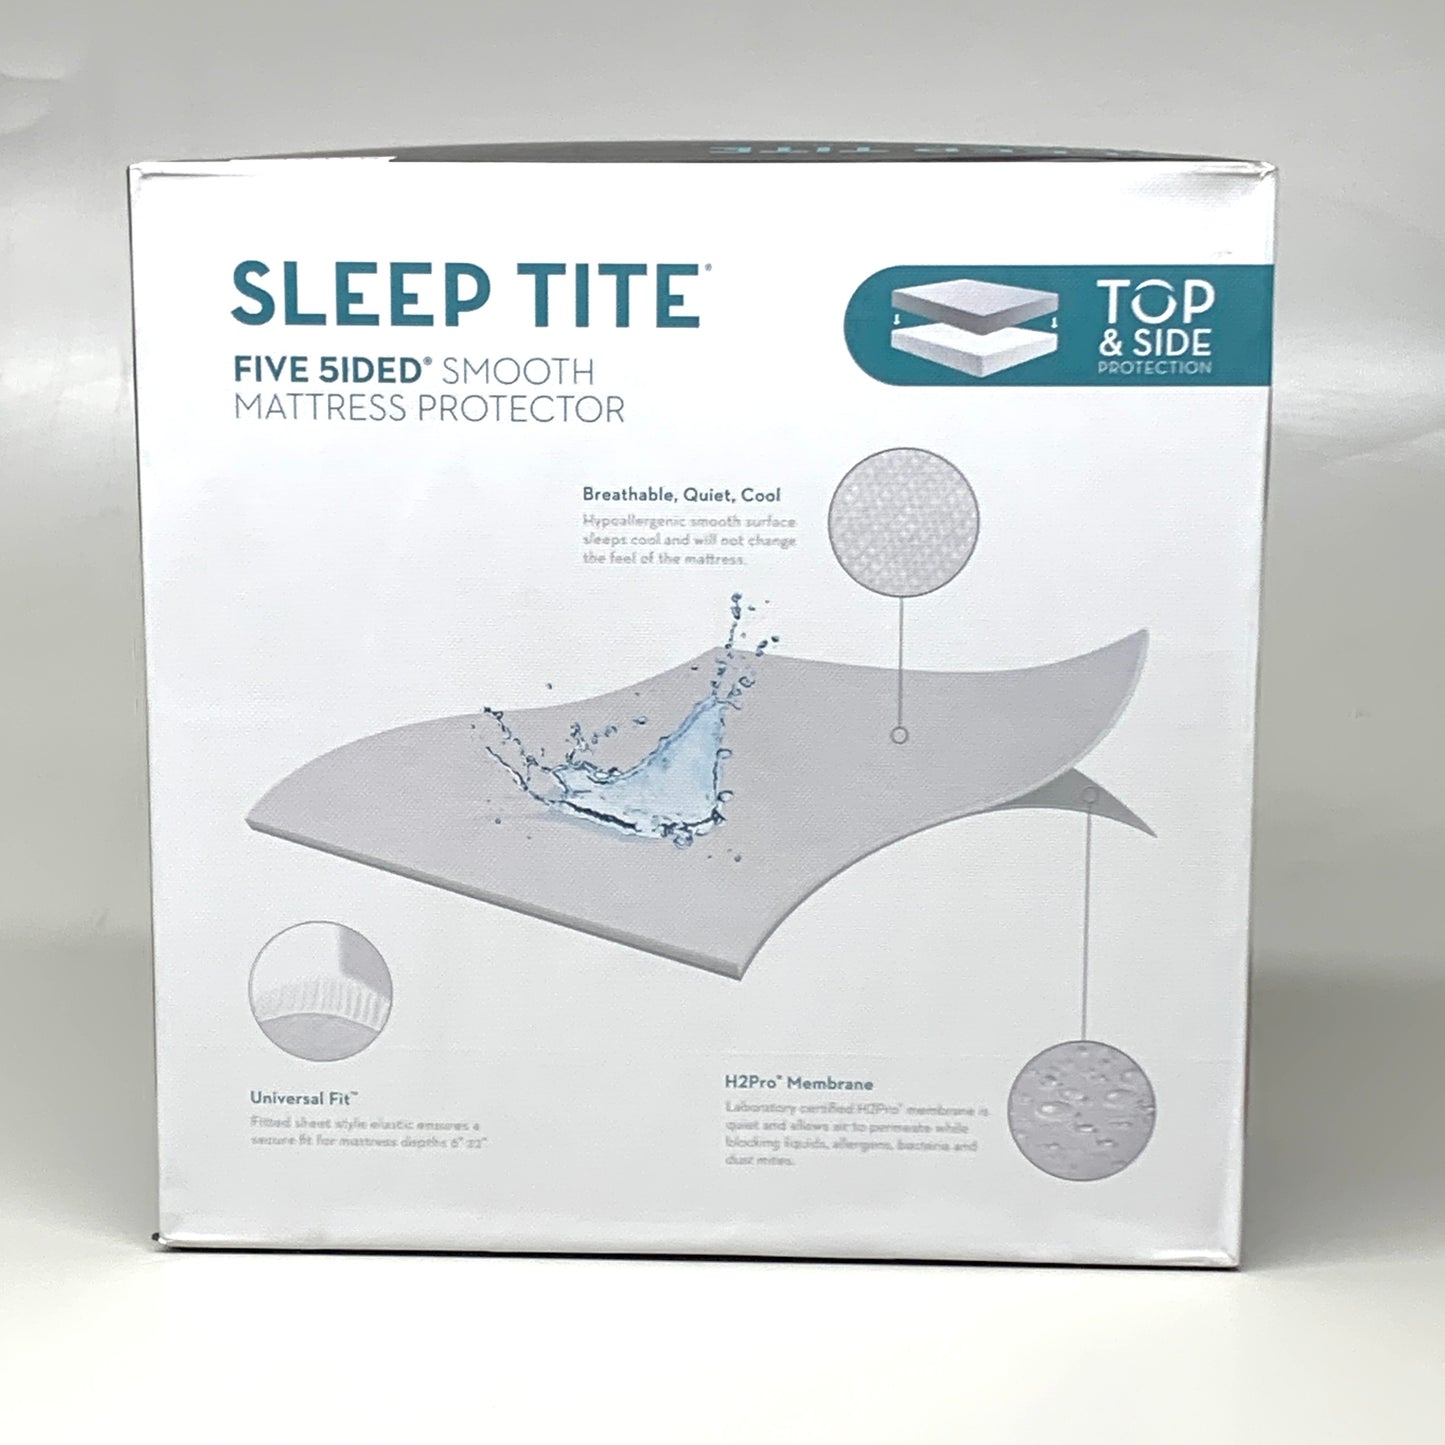 MALOUF Sleep-Tite Five 5ided Smooth Mattress Protector Sz King 100% Water-Proof